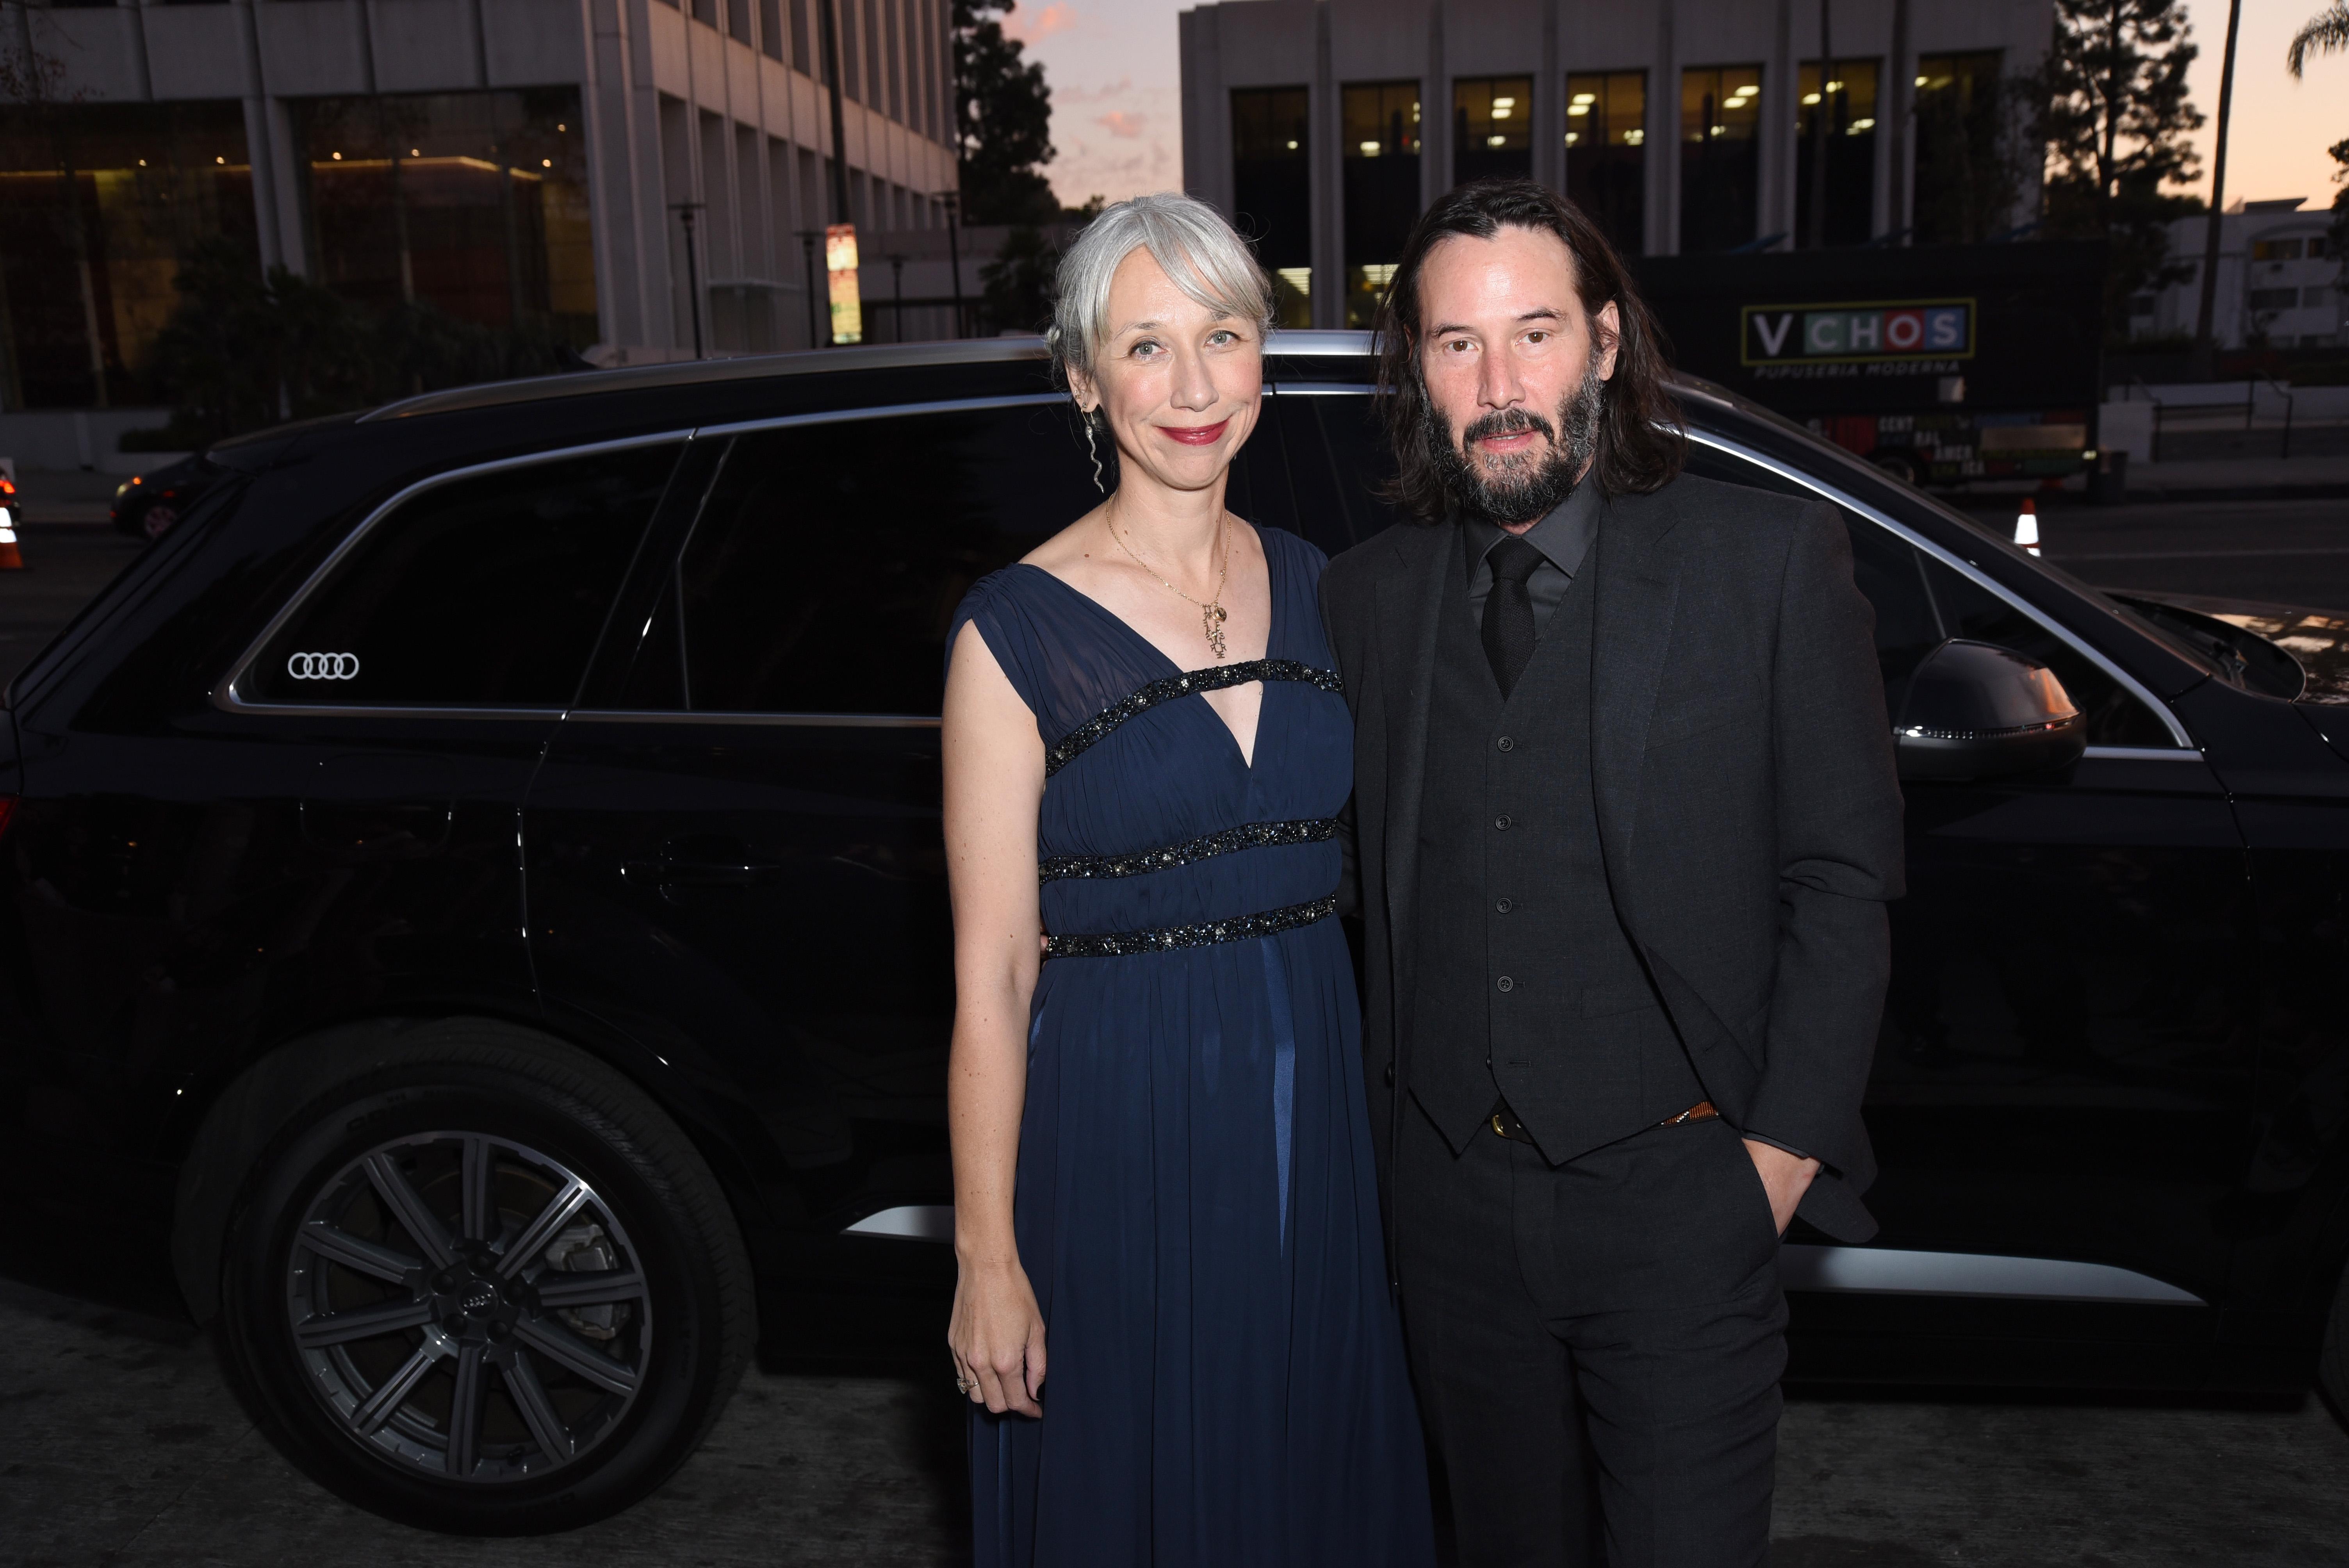 Keanu Reeves Is Allegedly Dating His Business Partner Alexandra Grant